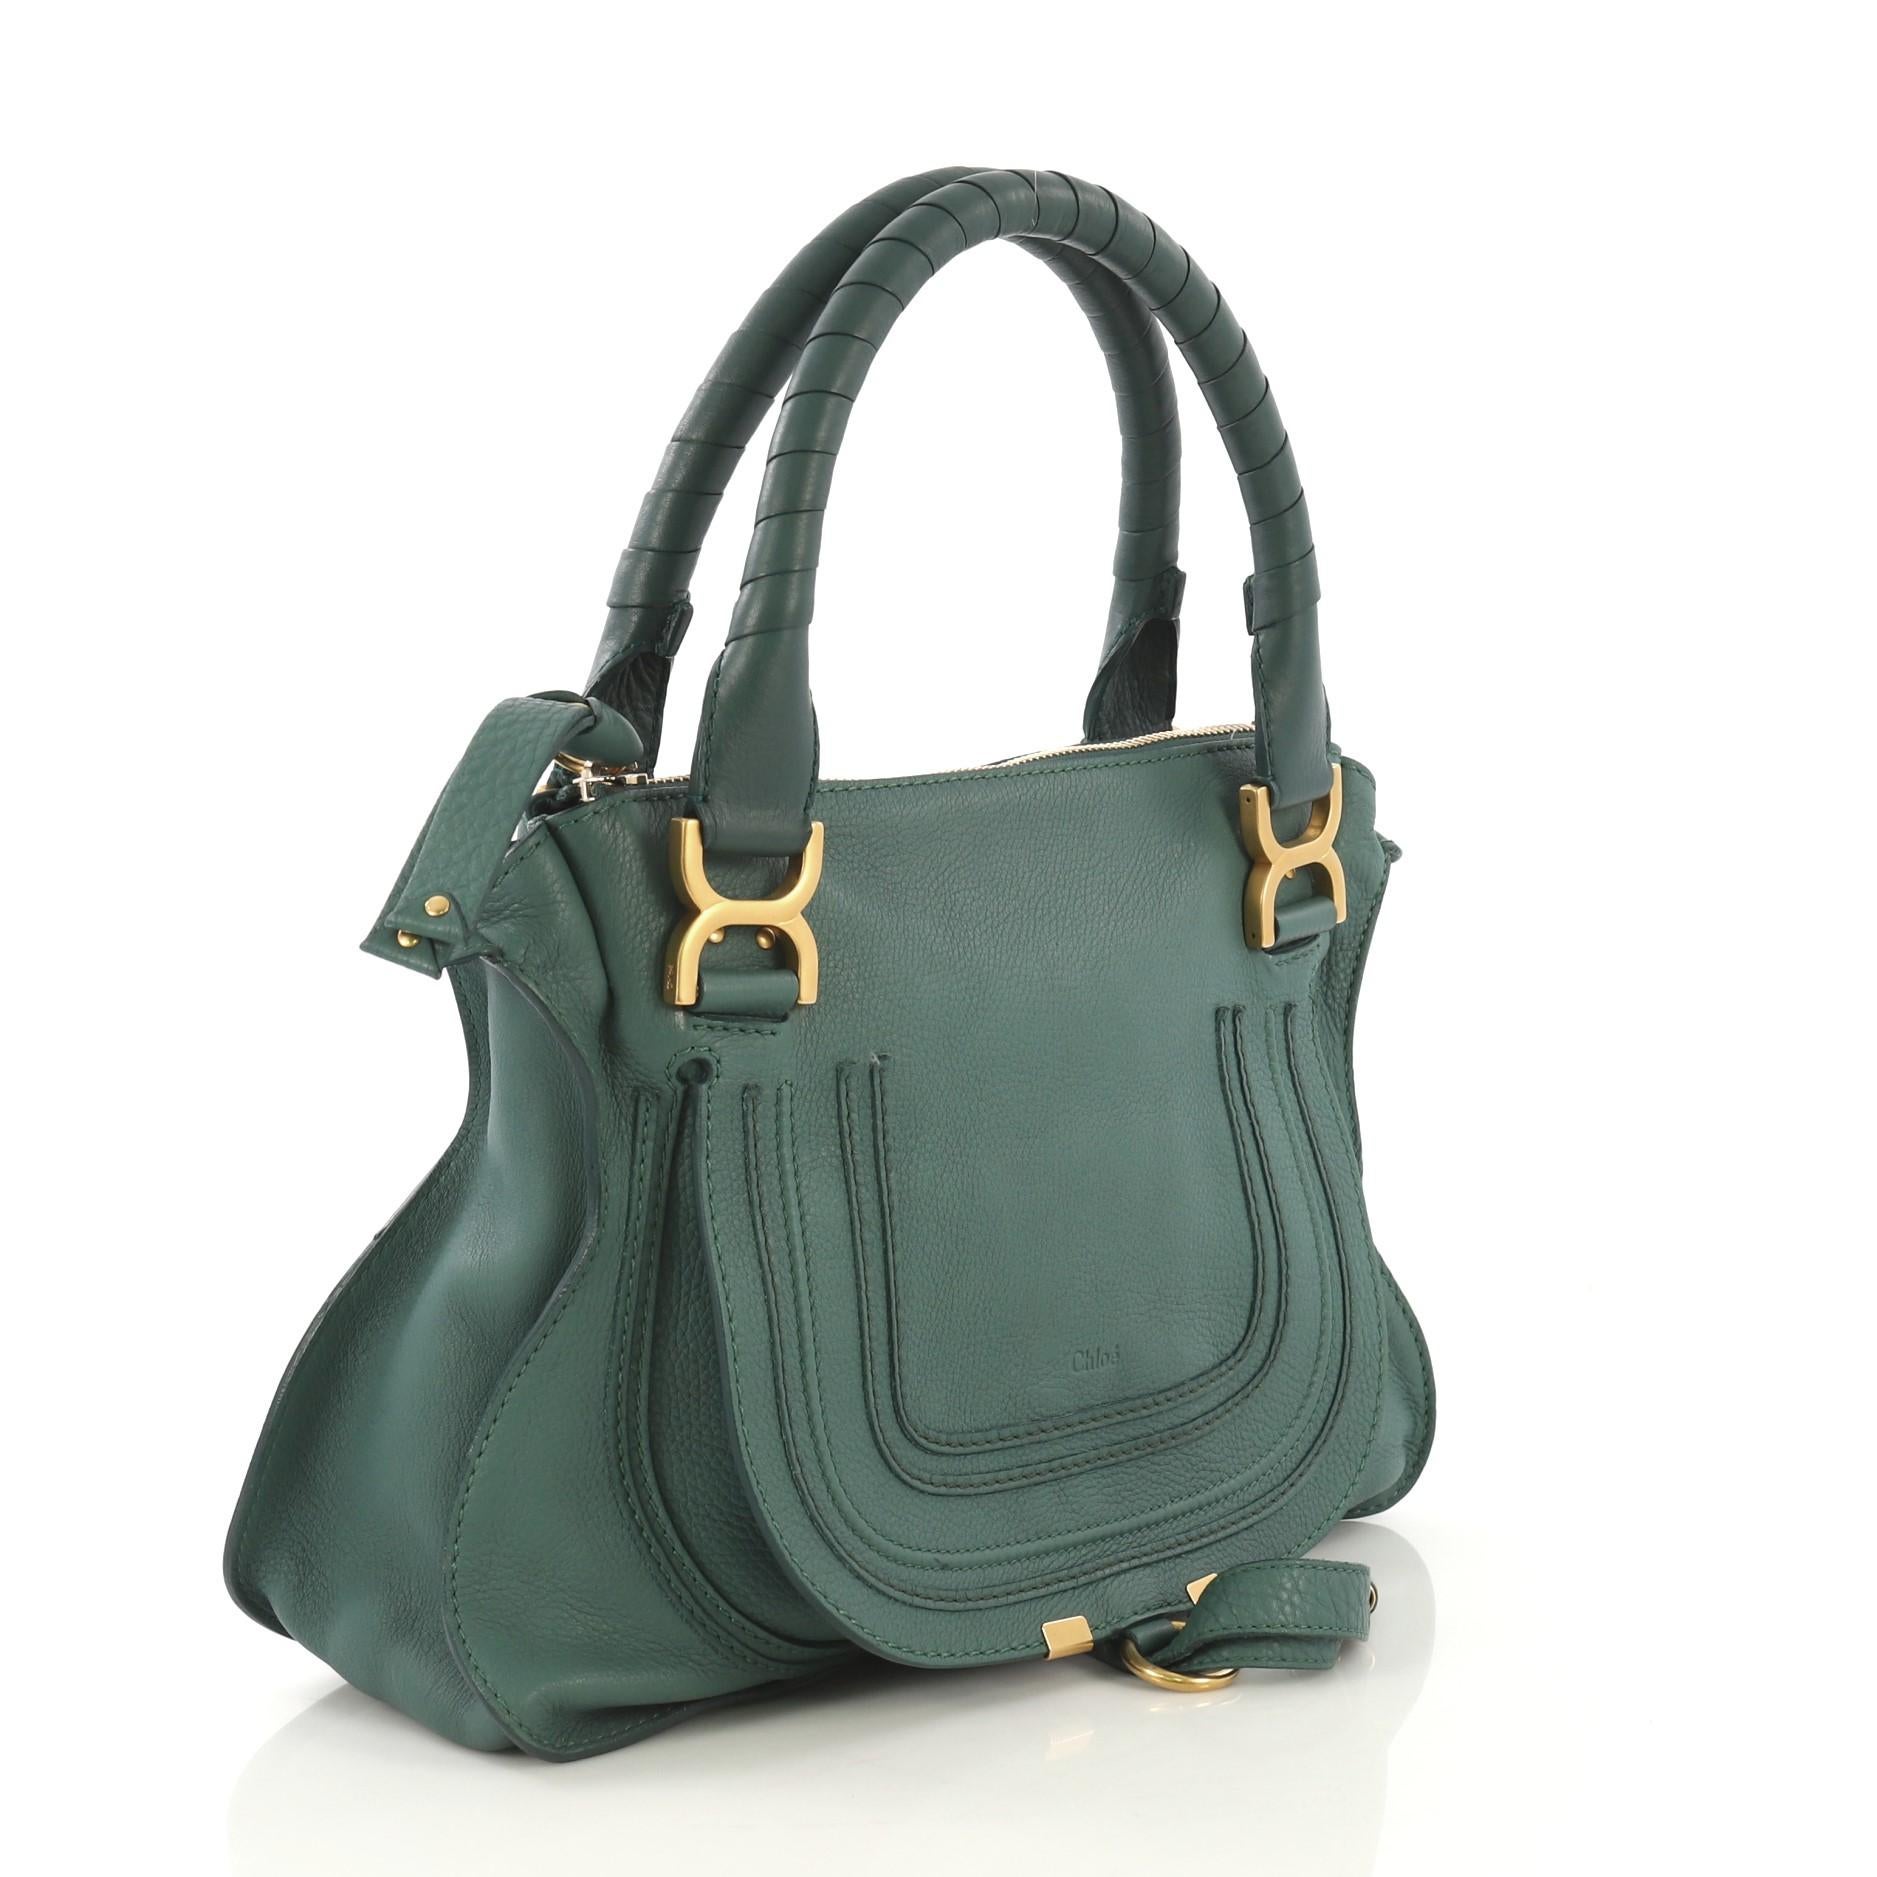 This Chloe Marcie Satchel Leather Medium, crafted in green leather, features wrapped leather handles, horseshoe stitched front flap, and gold-tone hardware. Its top zip closure opens to a green fabric interior with zip and slip pockets. 

Estimated